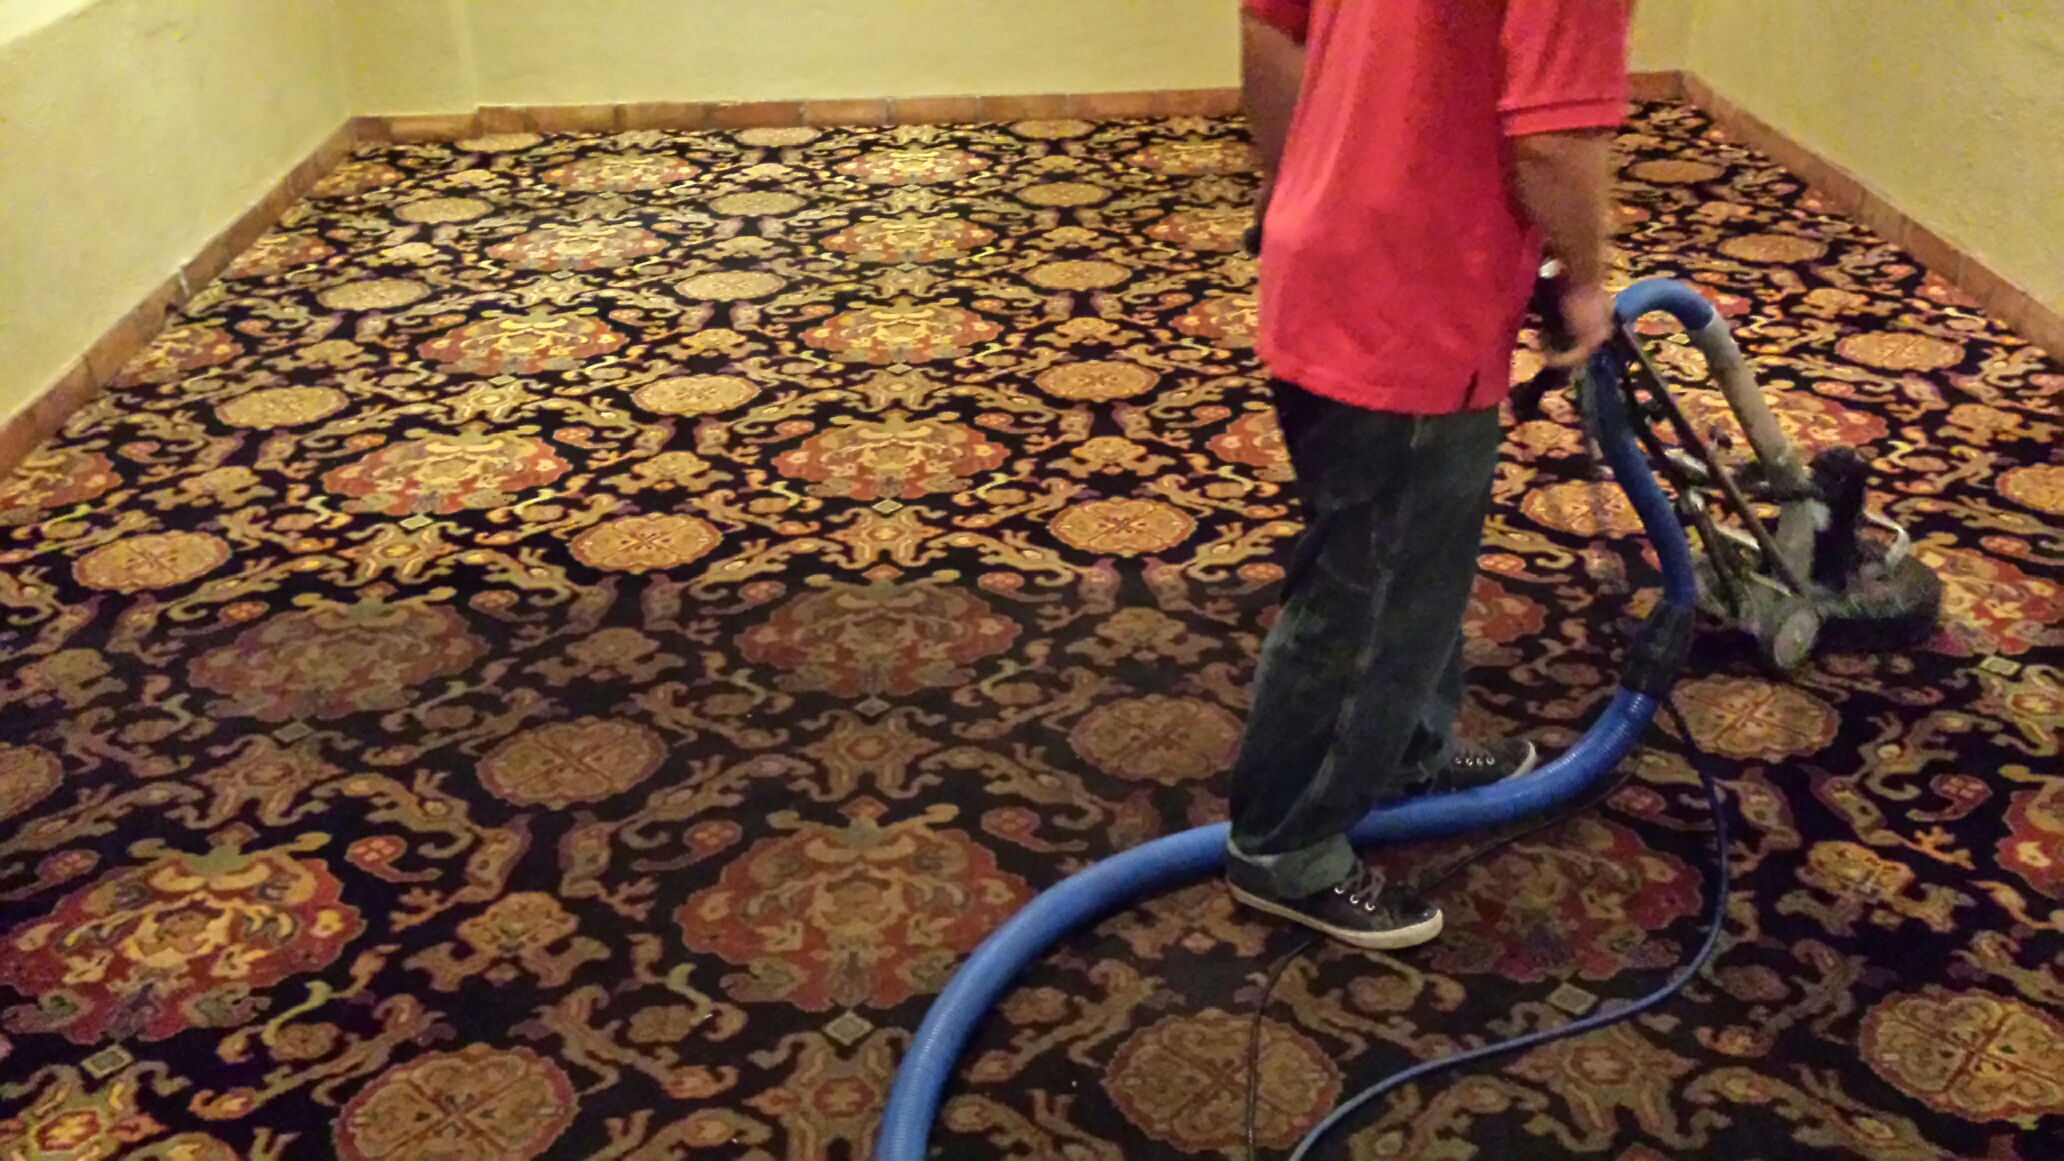 Carpet Cleaning Services Available In Phoenix Az